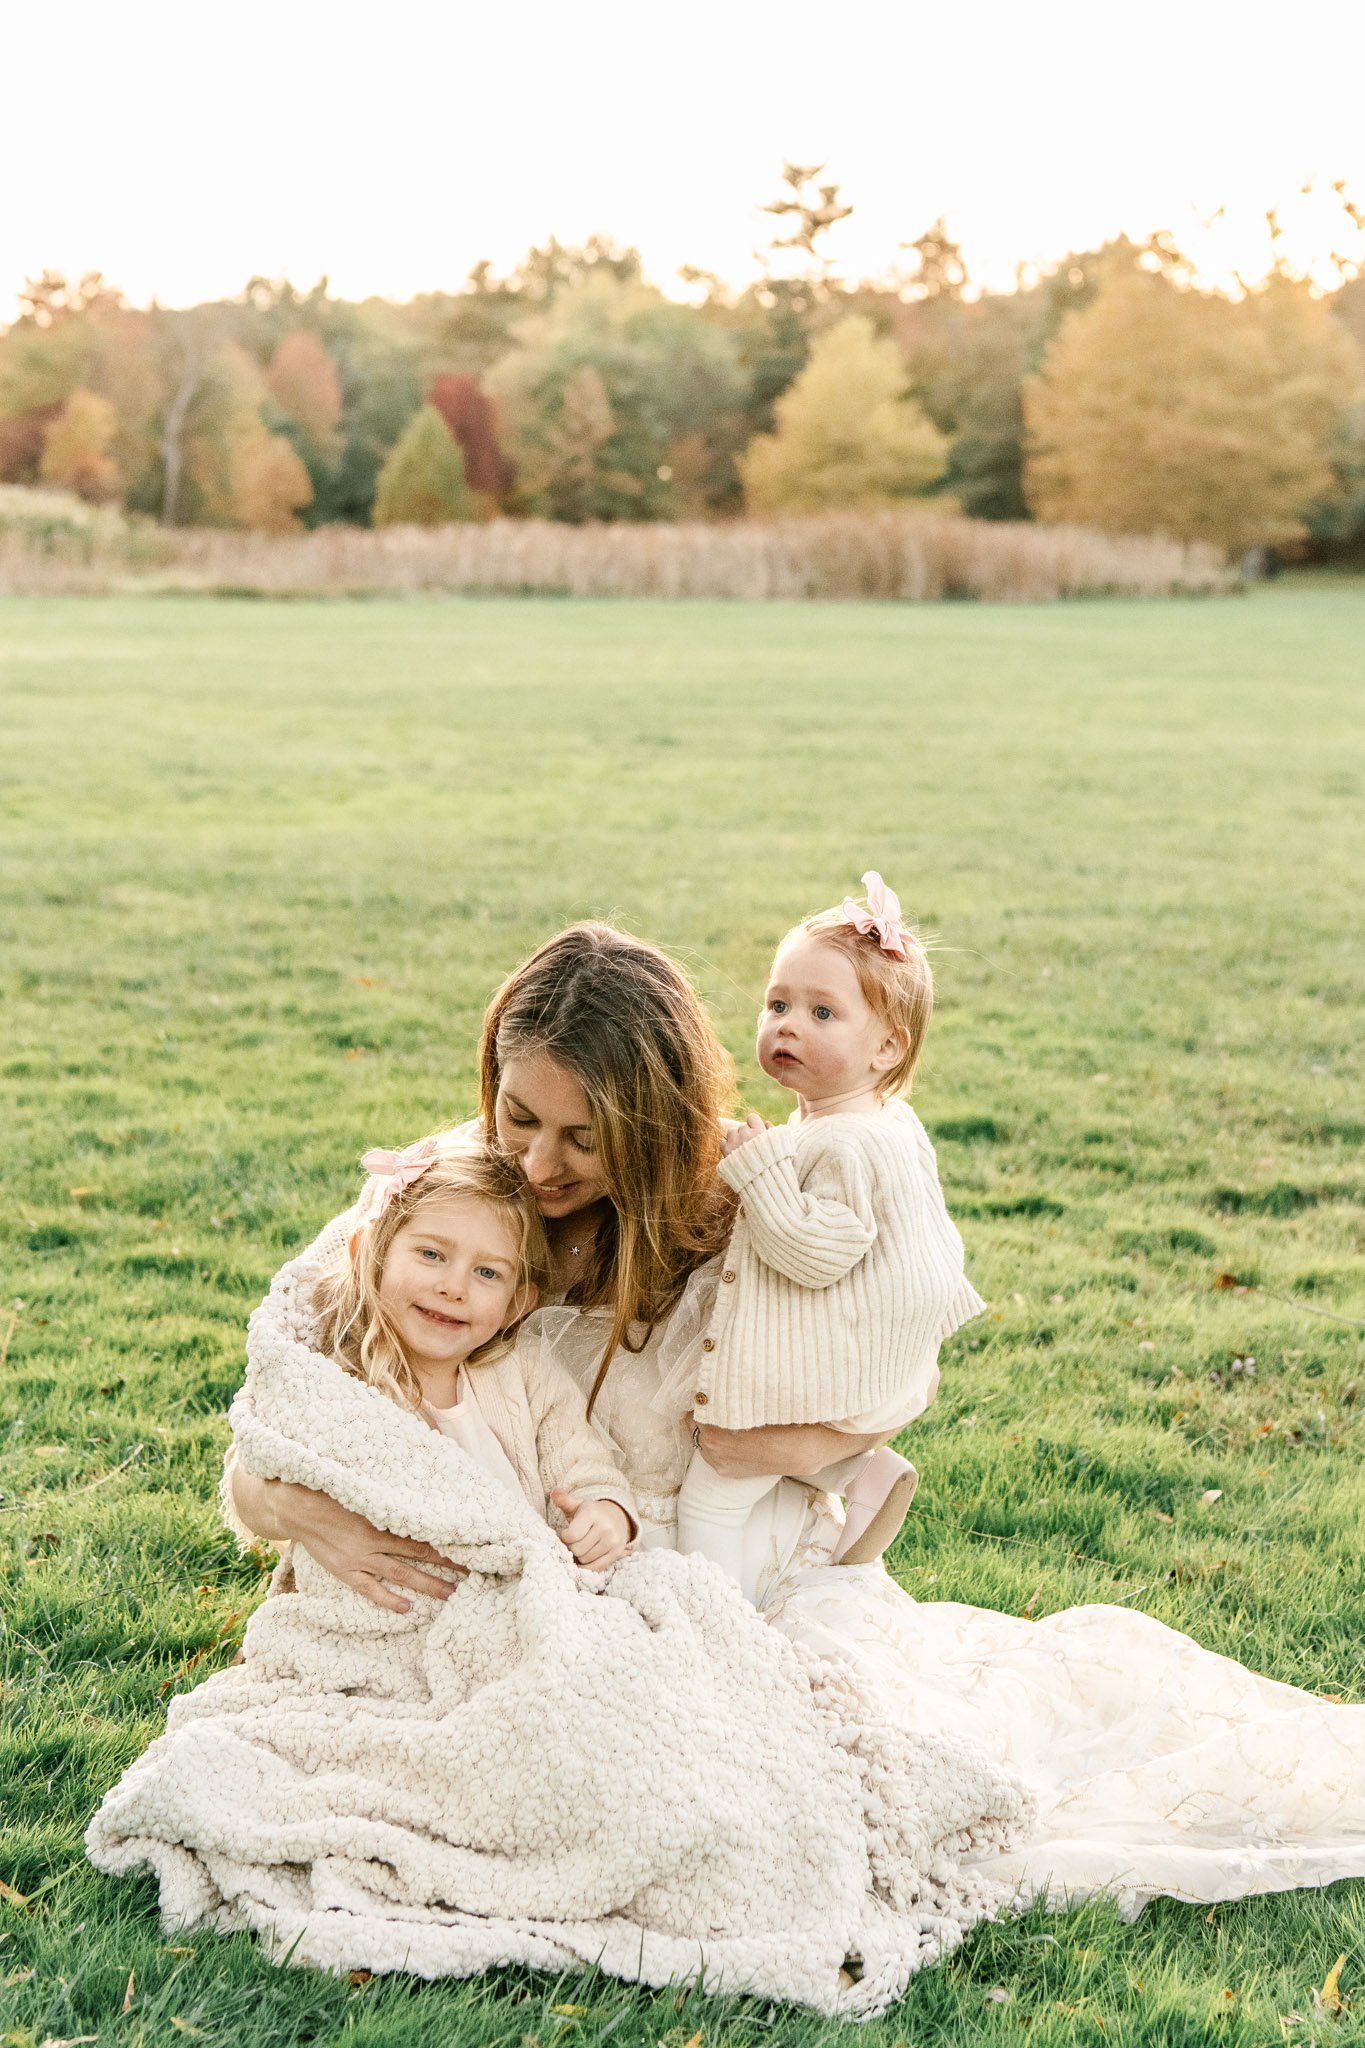  A mother sits on a grass field while holding two little girls with fall leaves behind them by Nicole Hawkins Photography. fall leaf family portrait  #NicoleHawkinsPhotography #NicoleHawkinsFamilies #FallFamilyPhotos #FallPortraits #NJFamilyPhotograp